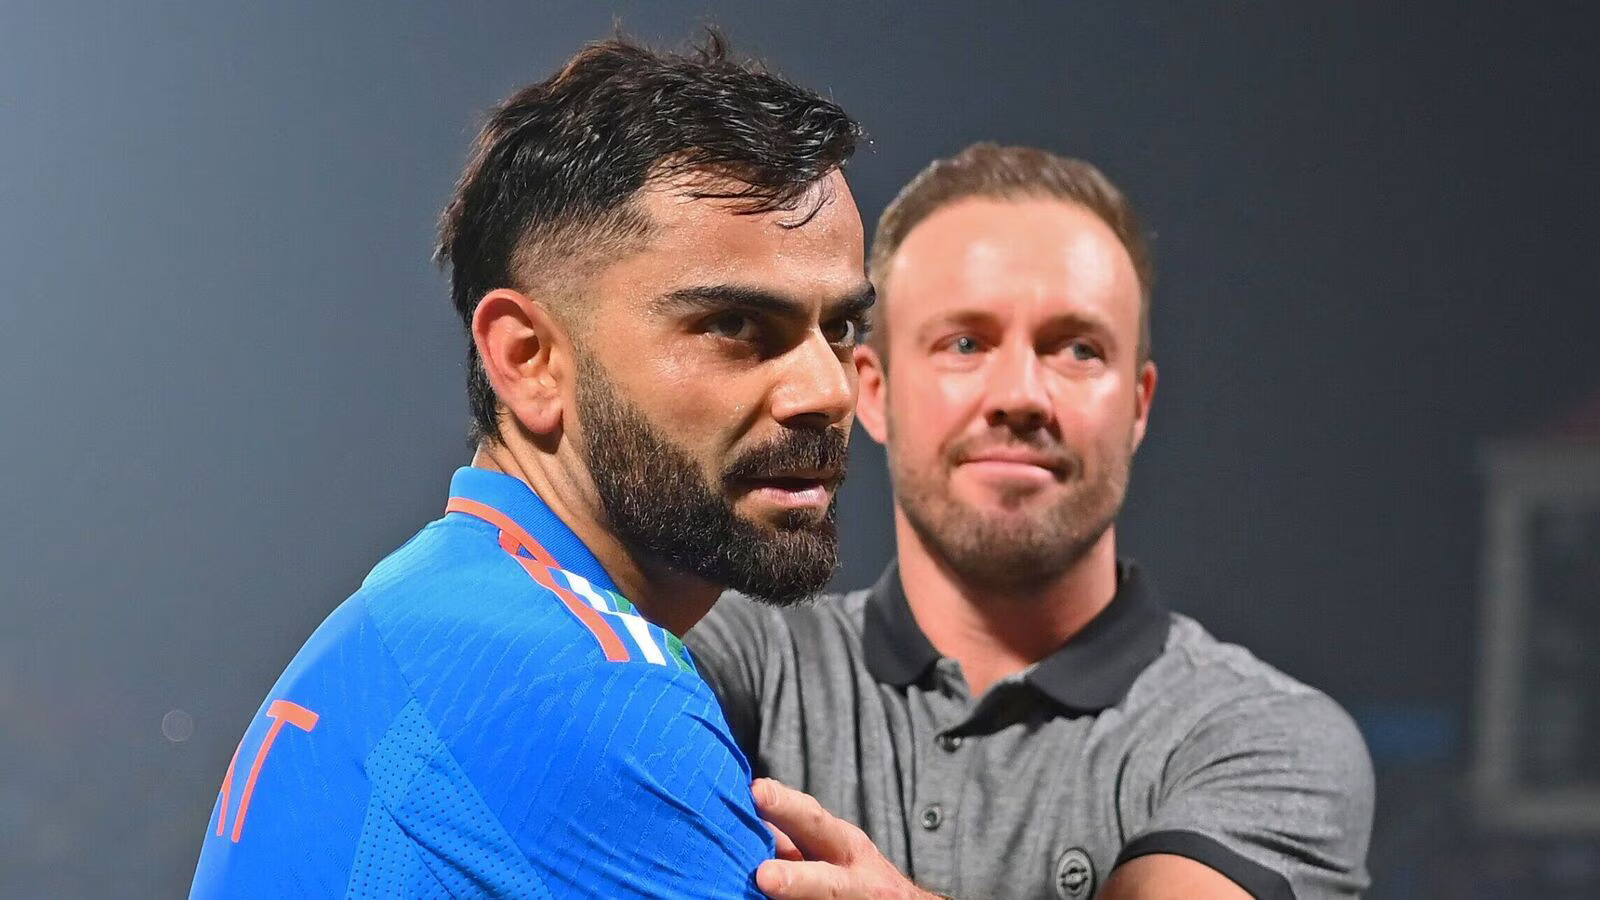 “Virat Kohli-One of the Best to Ever Play Cricket”: AB de Villiers